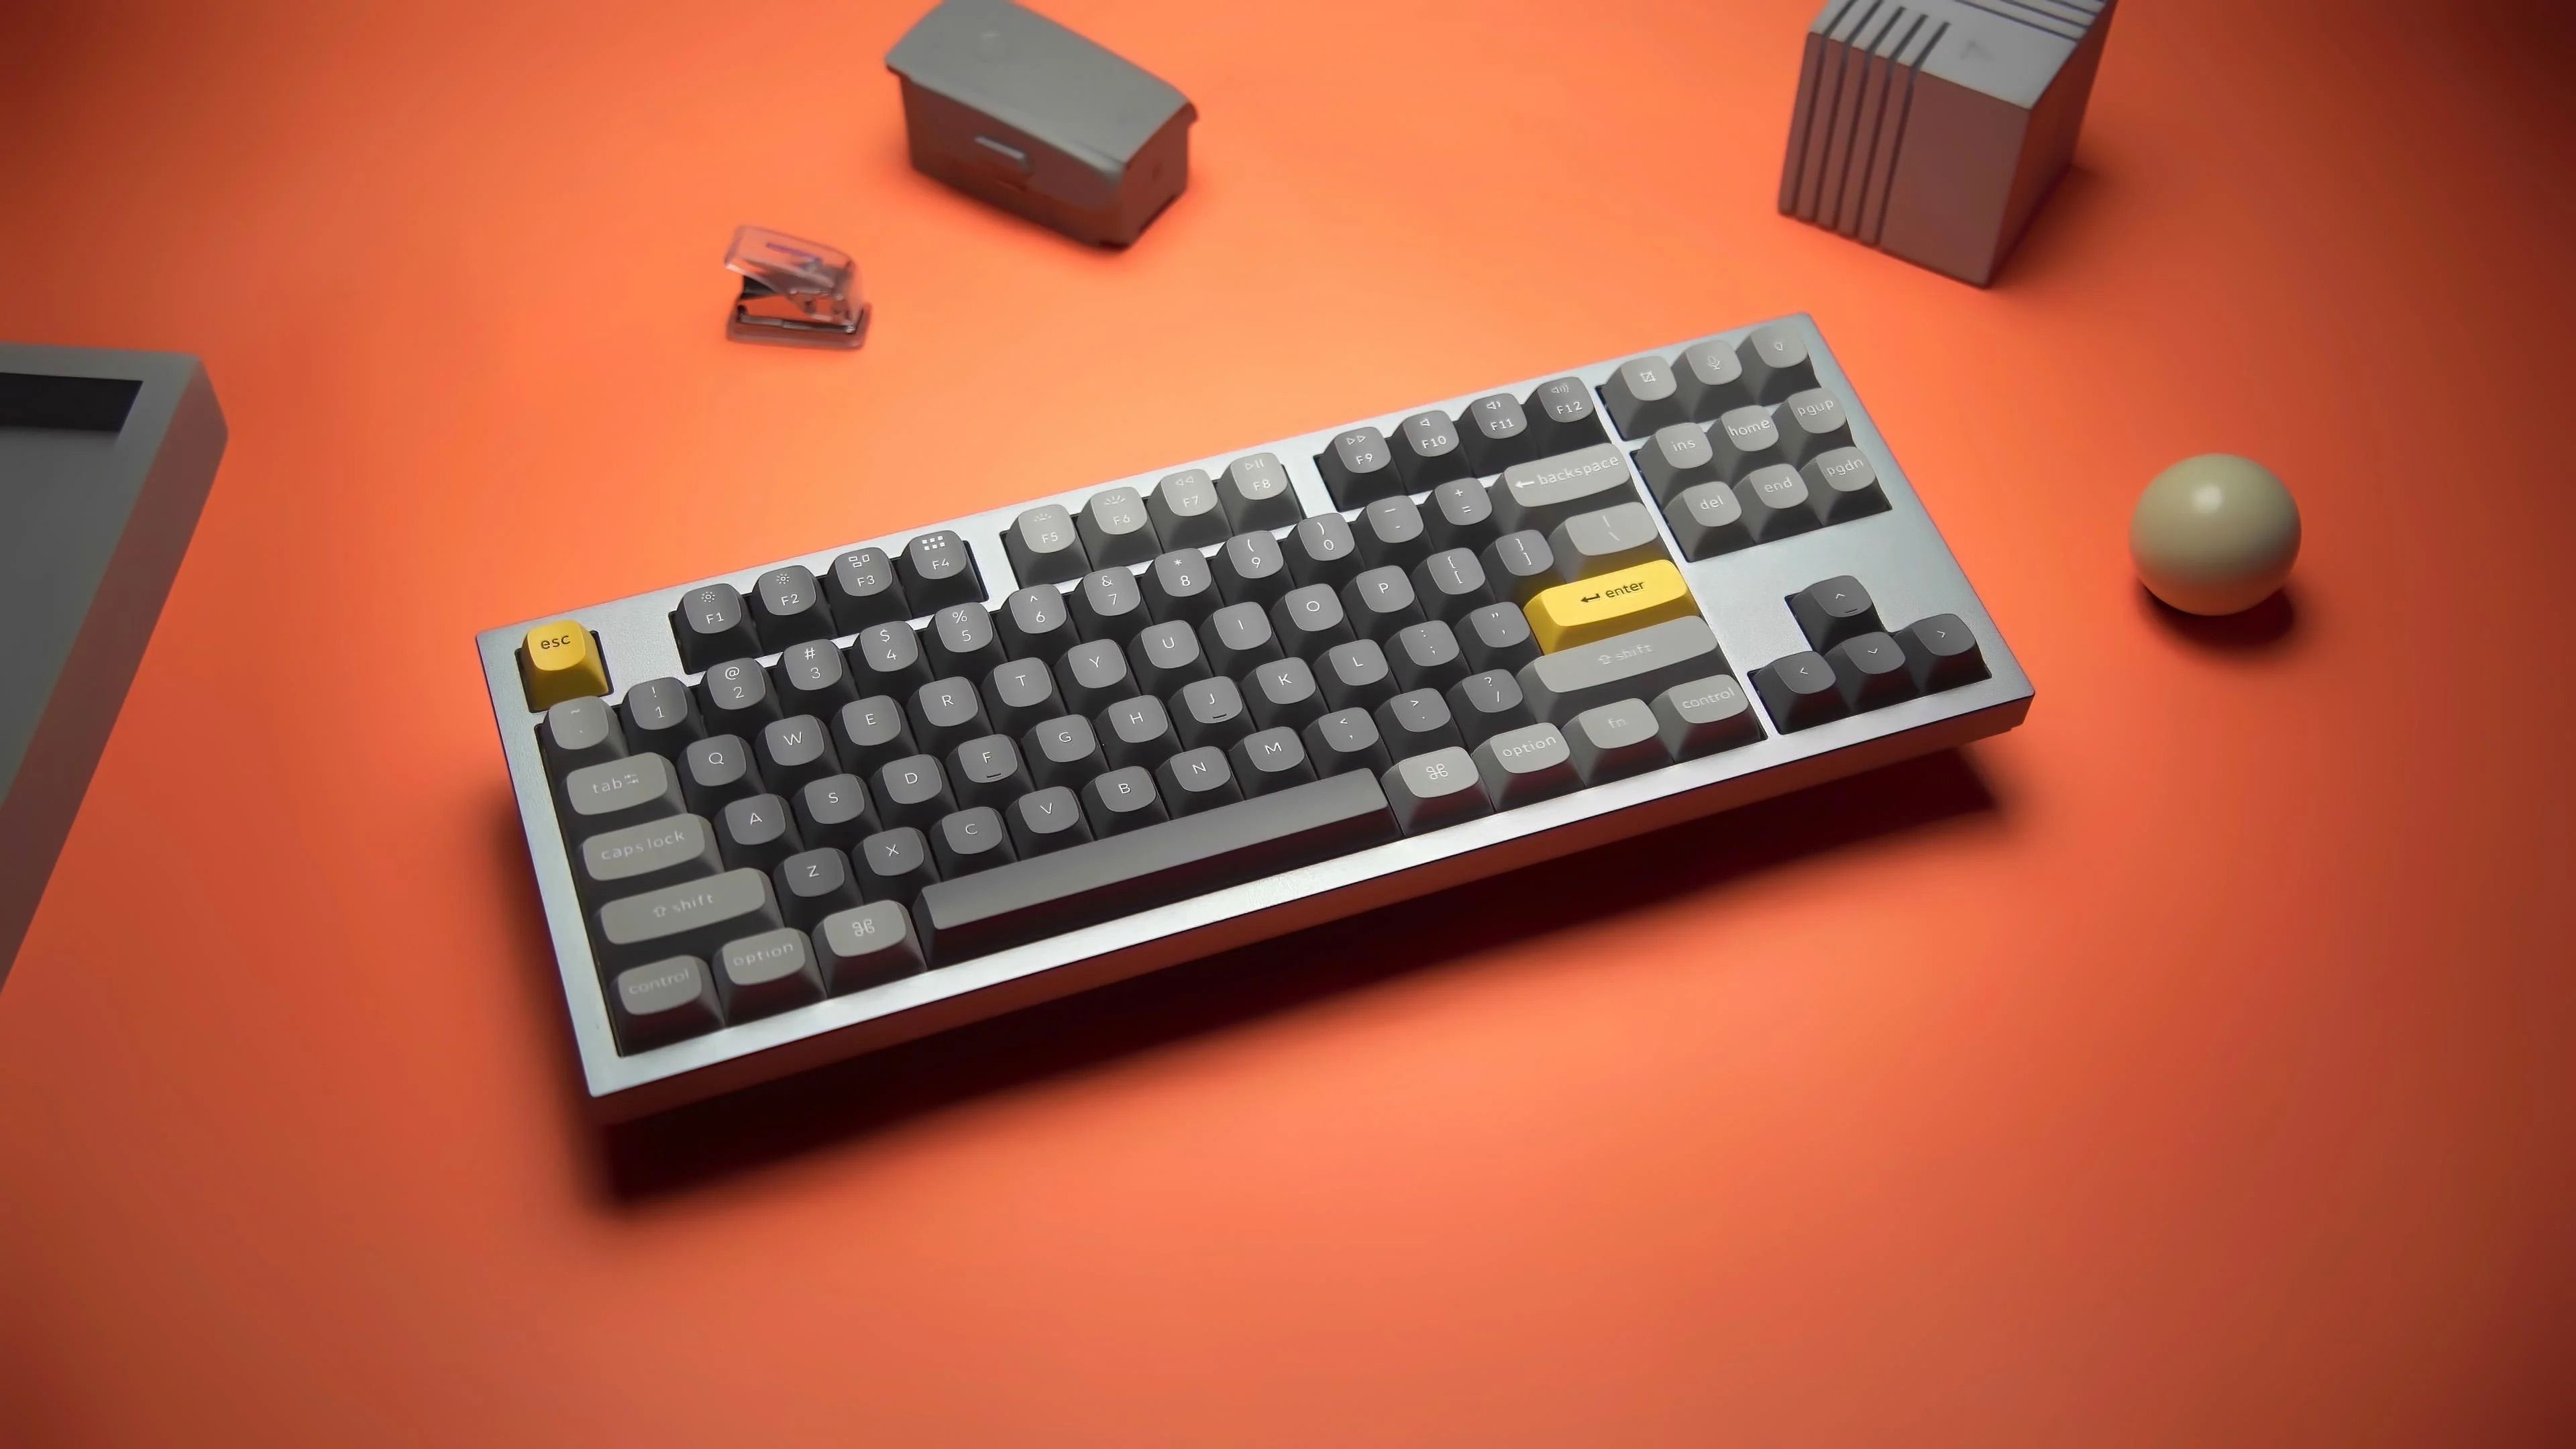 A grey and silver mechanical keyboard on an orange background.